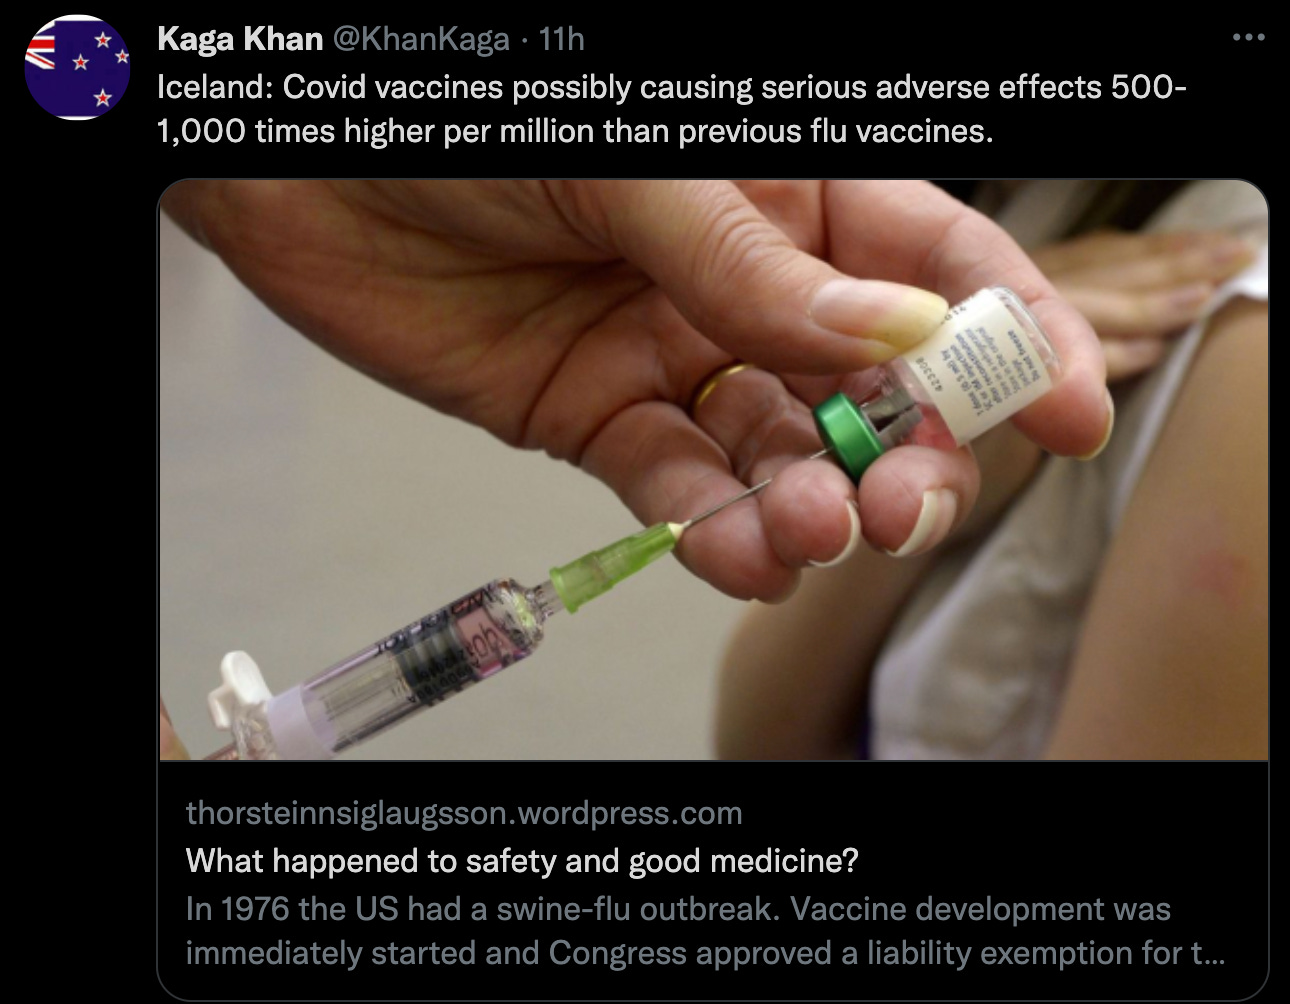 "Iceland: Covid vaccines possibly causing serious adverse effects 500-1,000 times higher per million than previous flu vaccines."